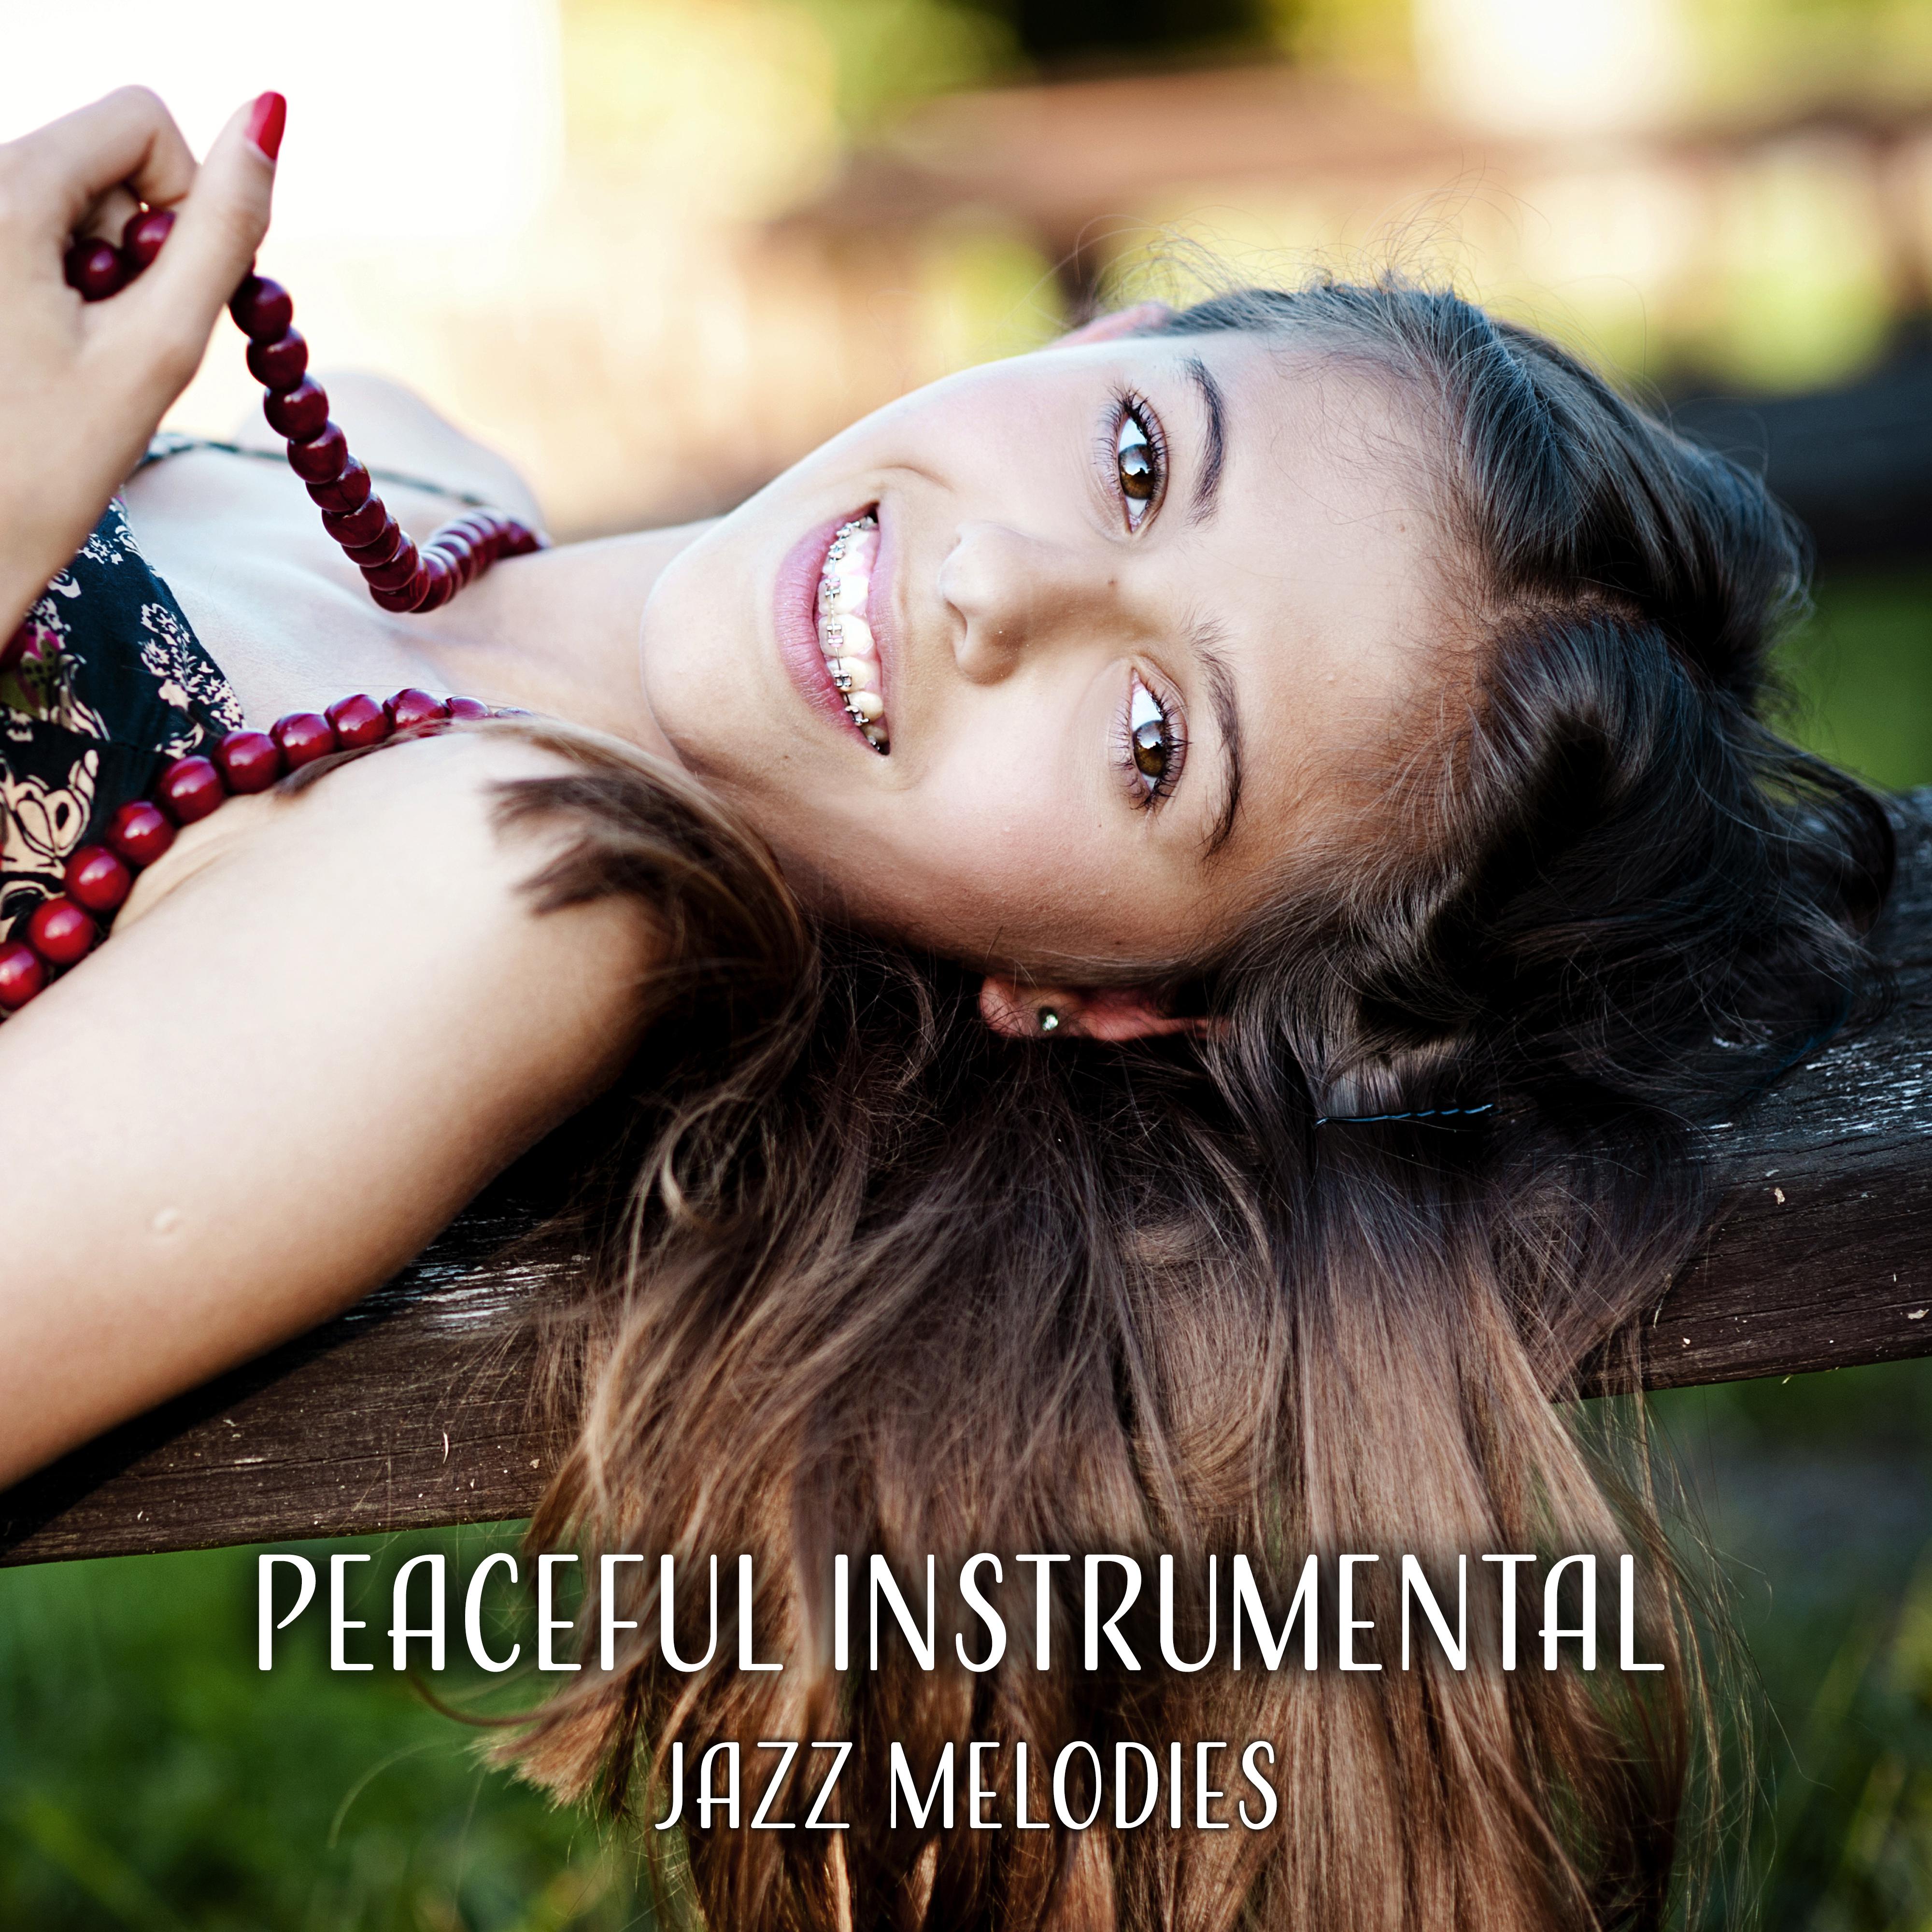 Peaceful Instrumental Jazz Melodies  Soft Sounds to Relax, Easy Listening, Calm Down with Jazz Music, Stress Relieve